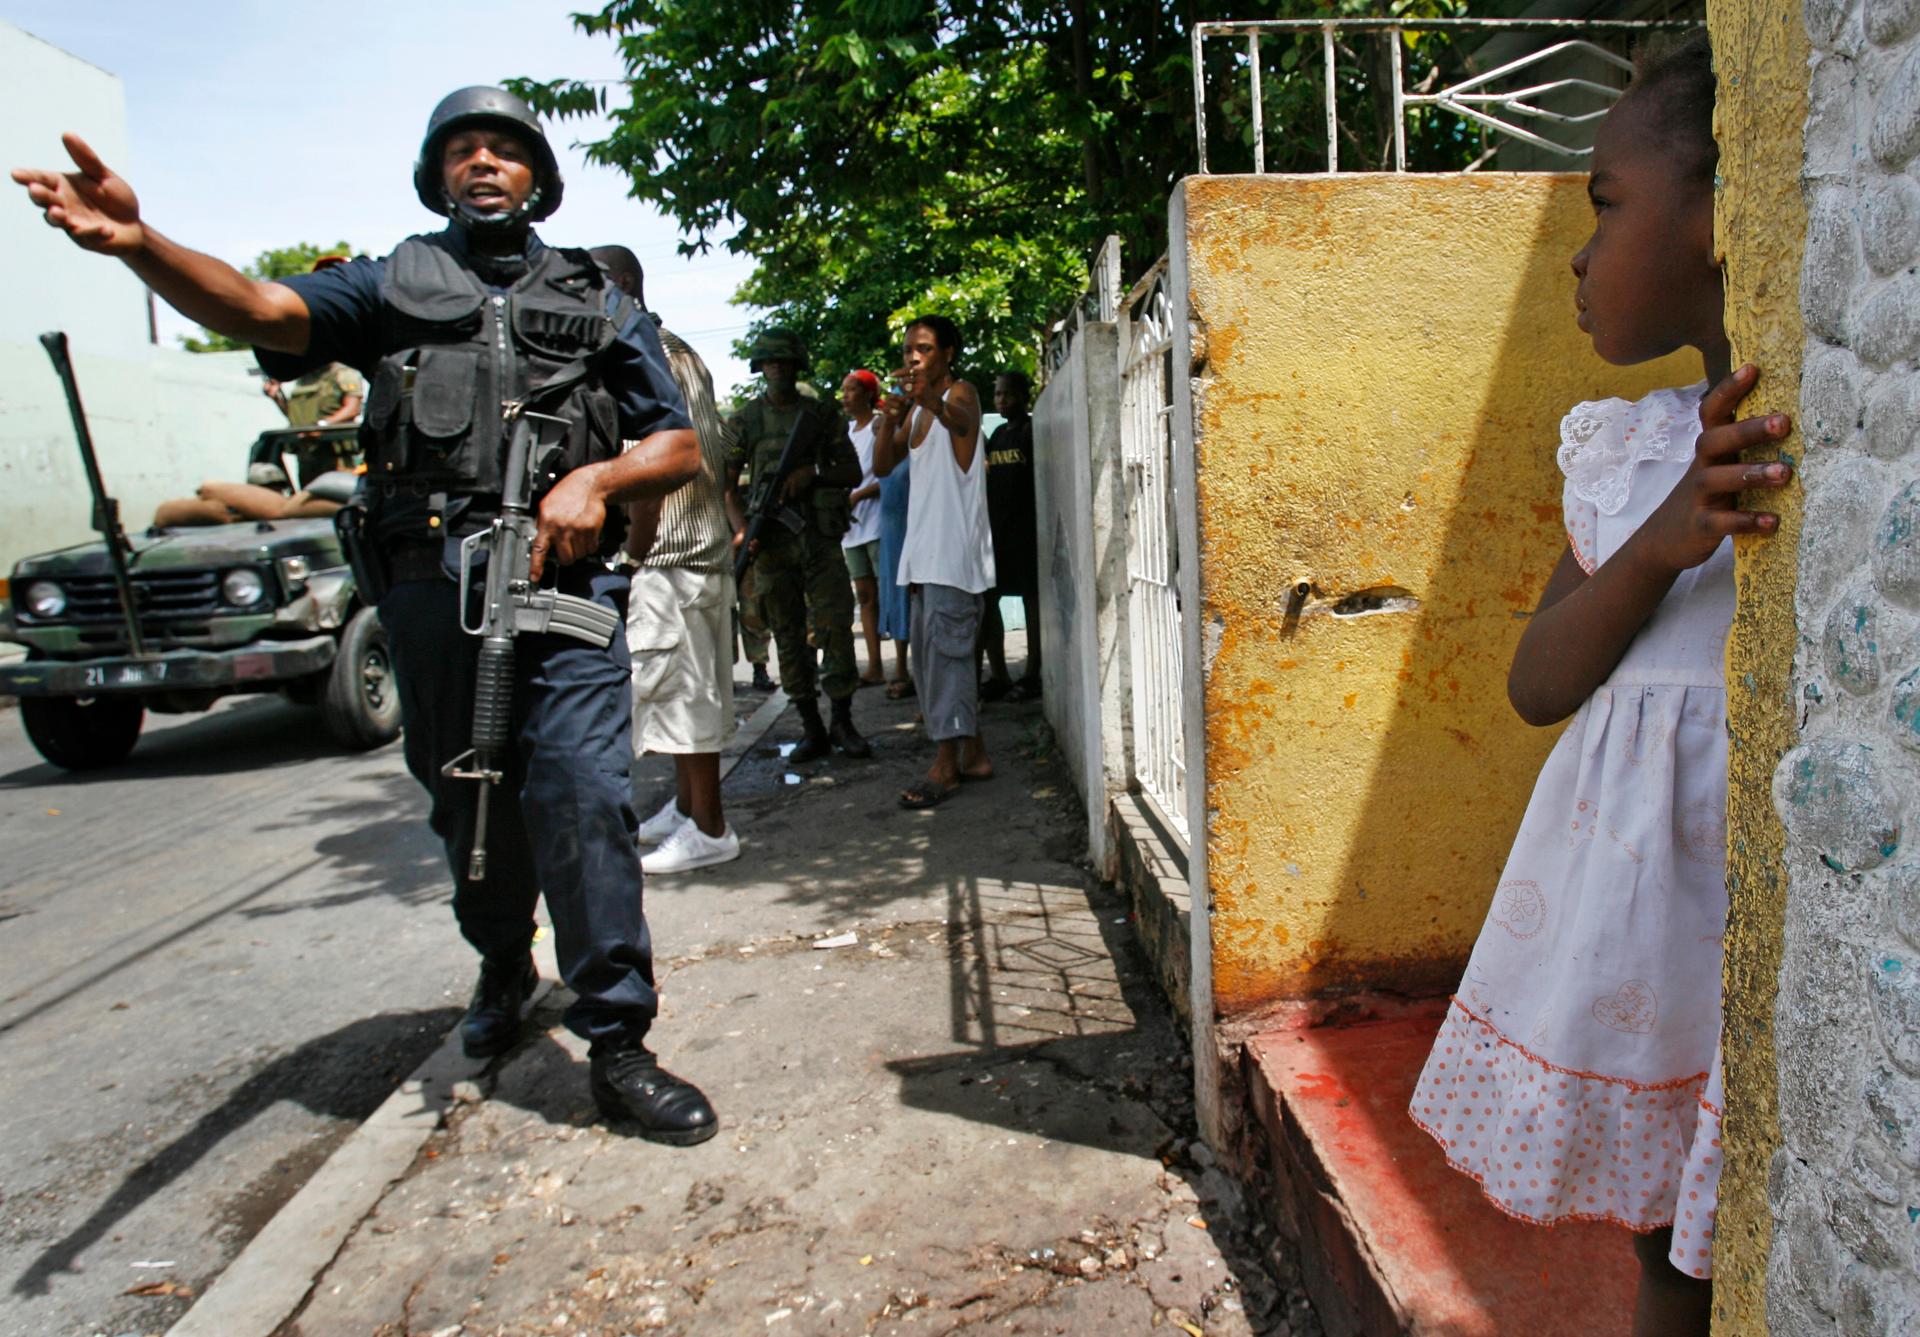 A police officer patrols the street as a little girl watches from her doorstep in the Tivoli Gardens neighborhood of Kingston, Jamaica, on May 27, 2010.